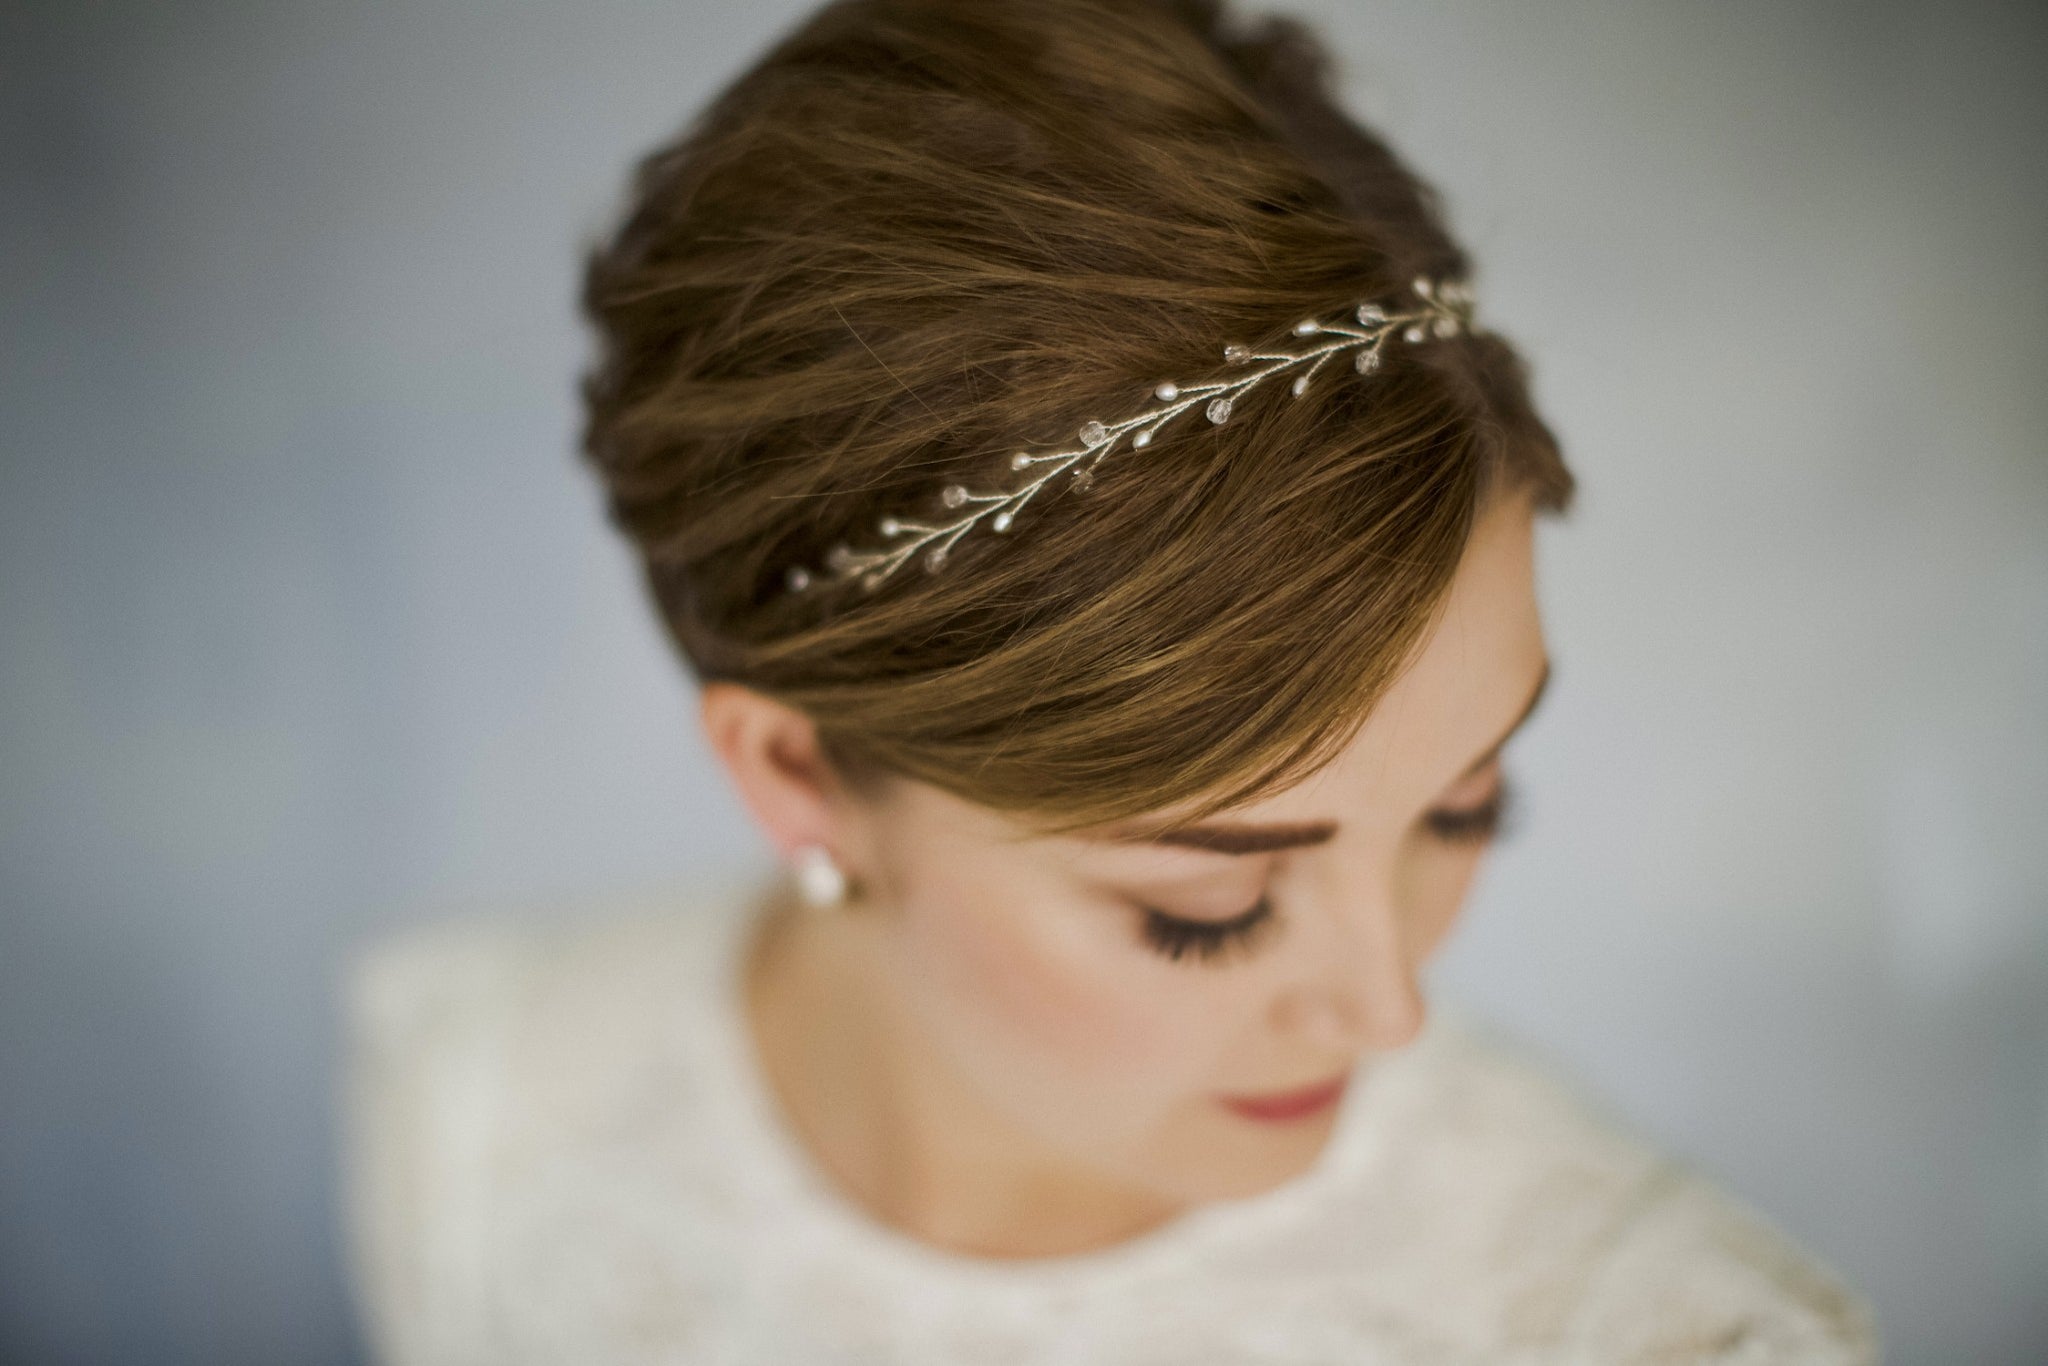 Simple crystal and pearl silver wedding headband with ribbon ties